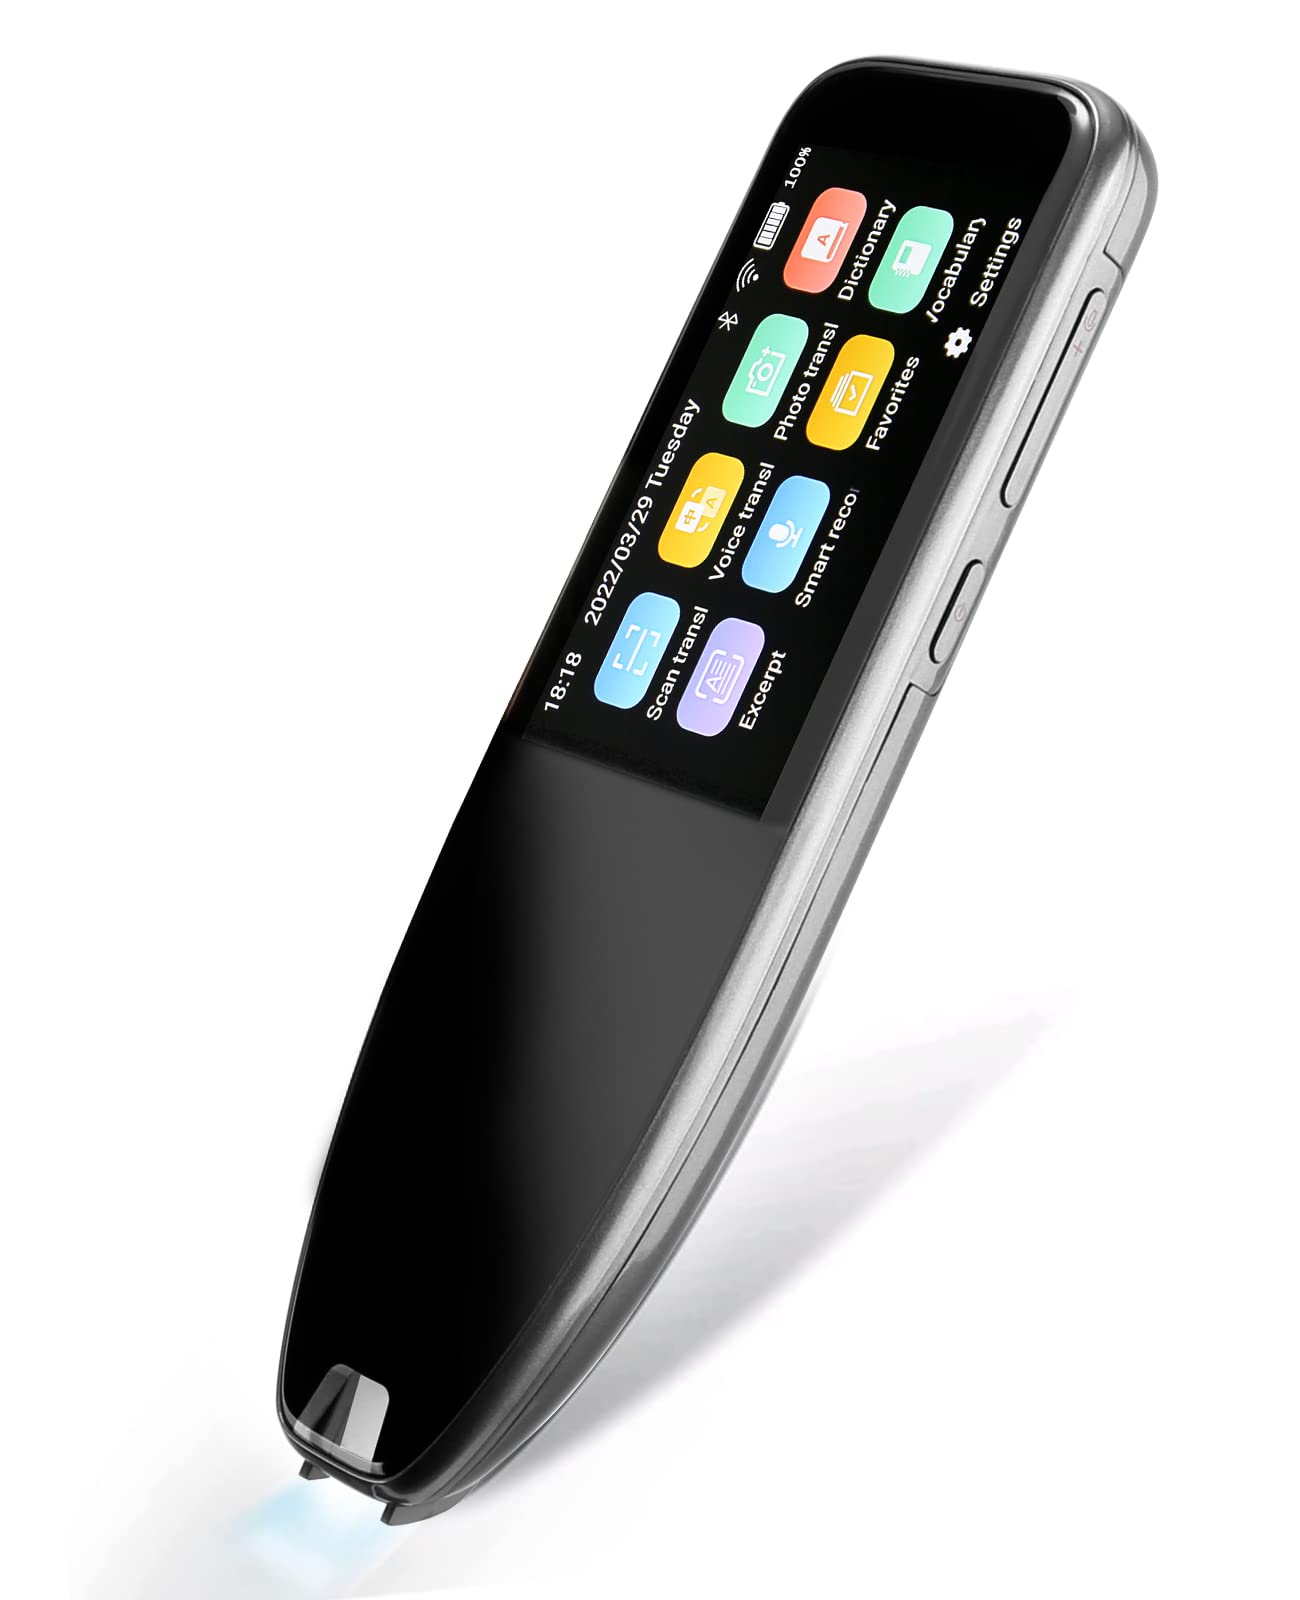 Language Translator Device Scanner Pen - Text to Speech Device for Dyslexia, Suitable for Language Learners Scan Translate Reading Pen,Fast - Under 0.5 Sec